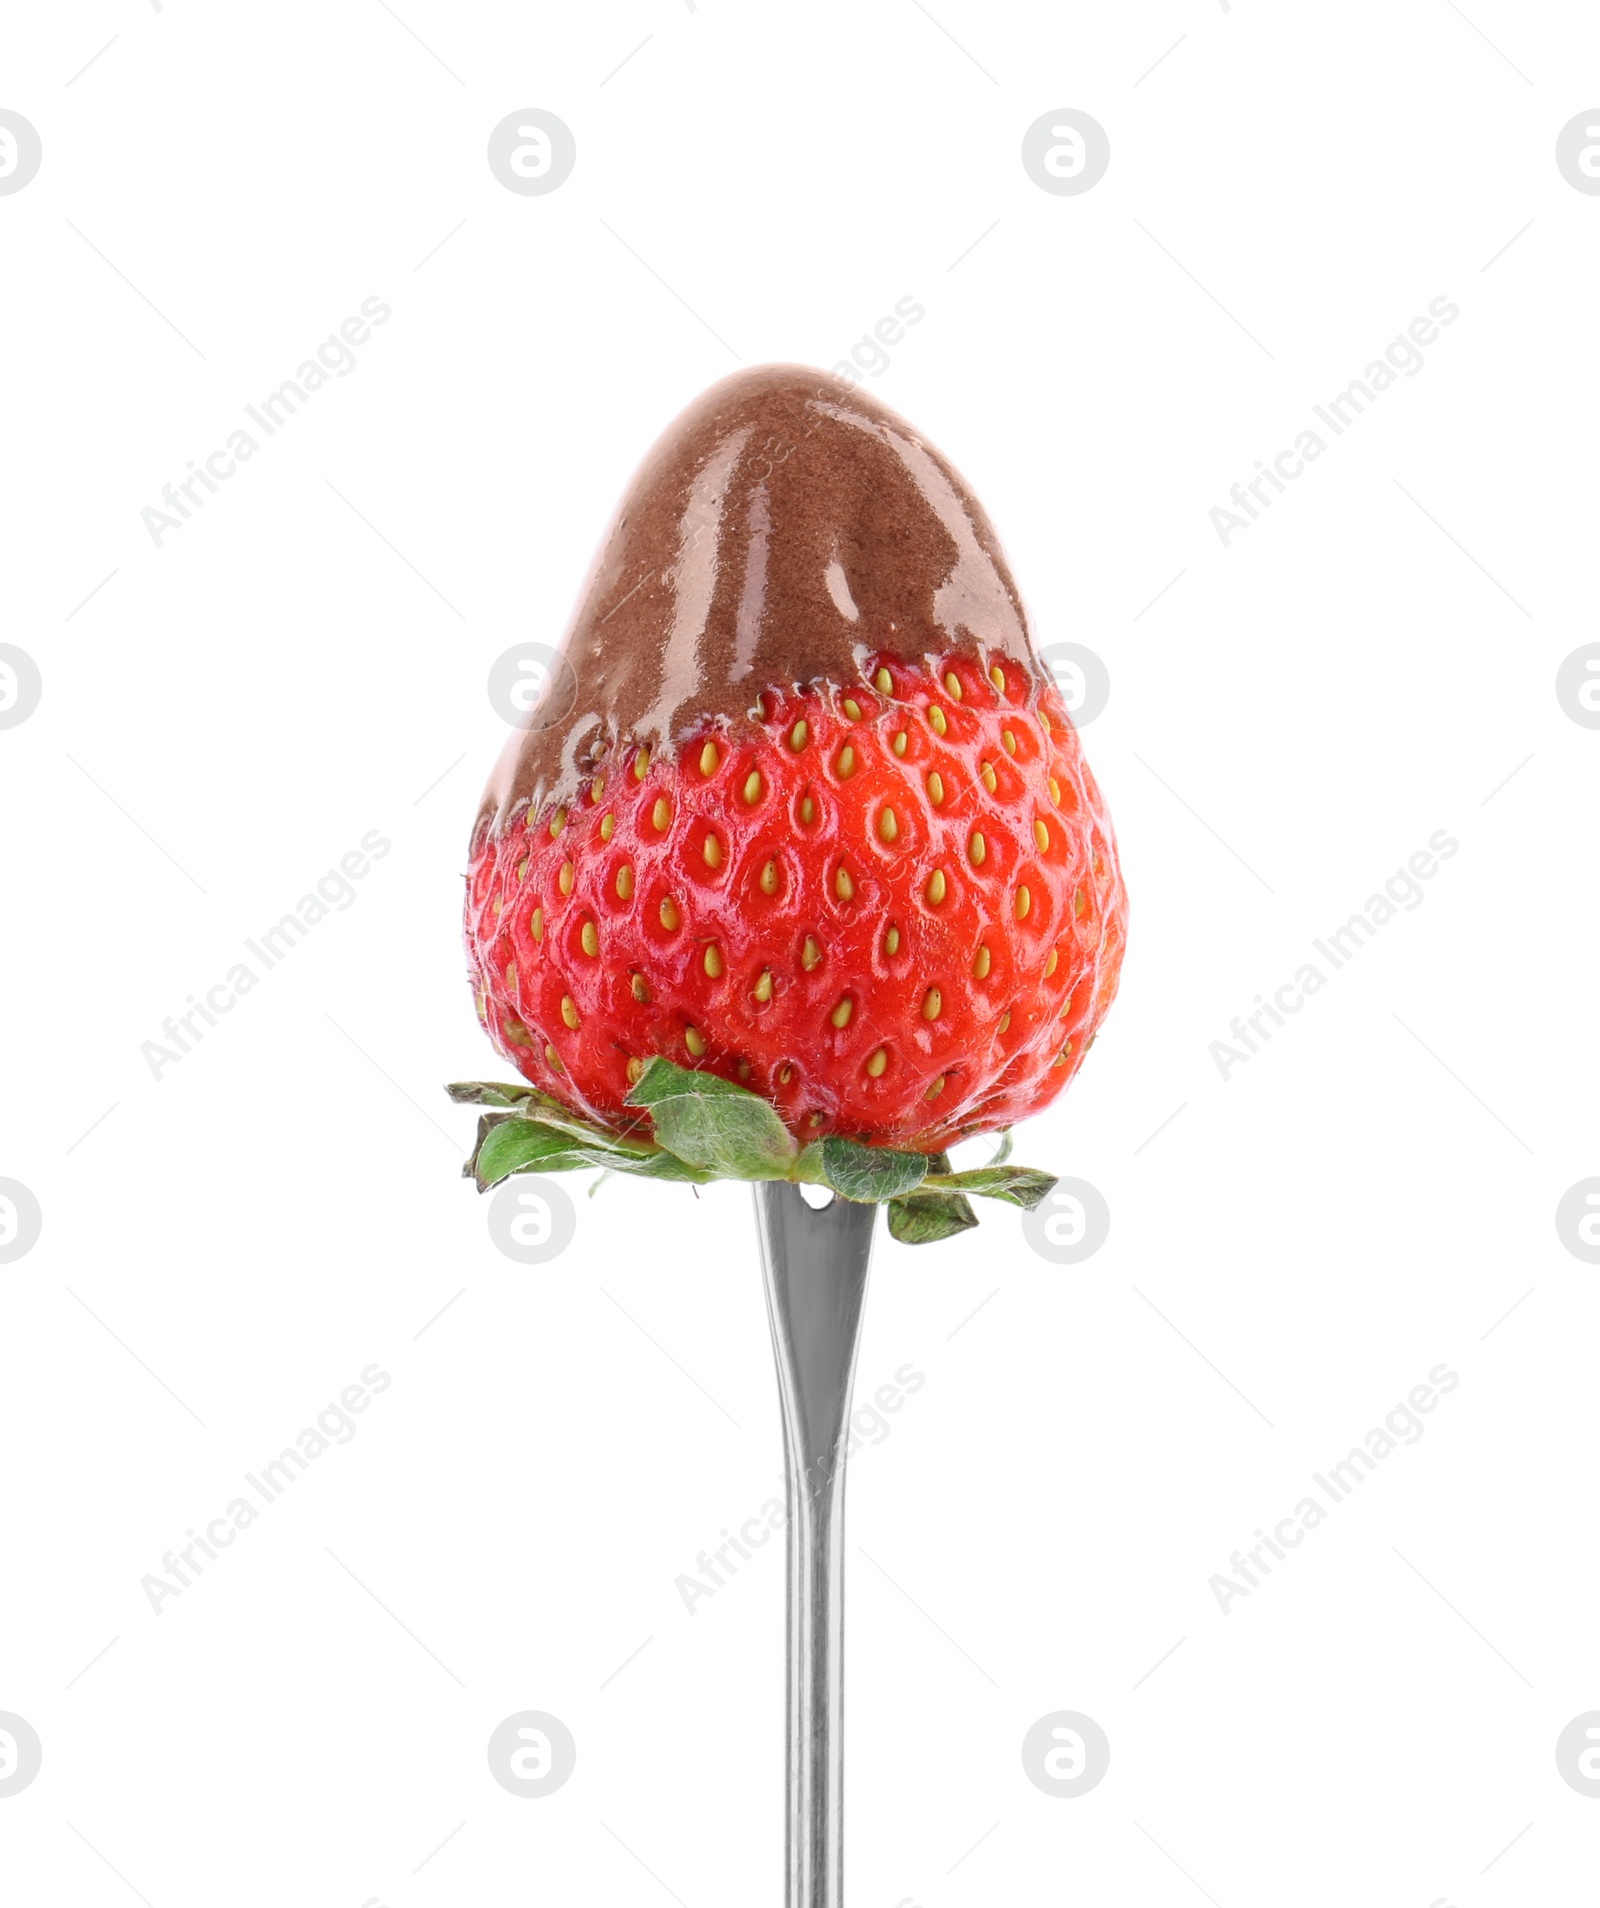 Photo of Strawberry with melted chocolate on fondue fork against white background